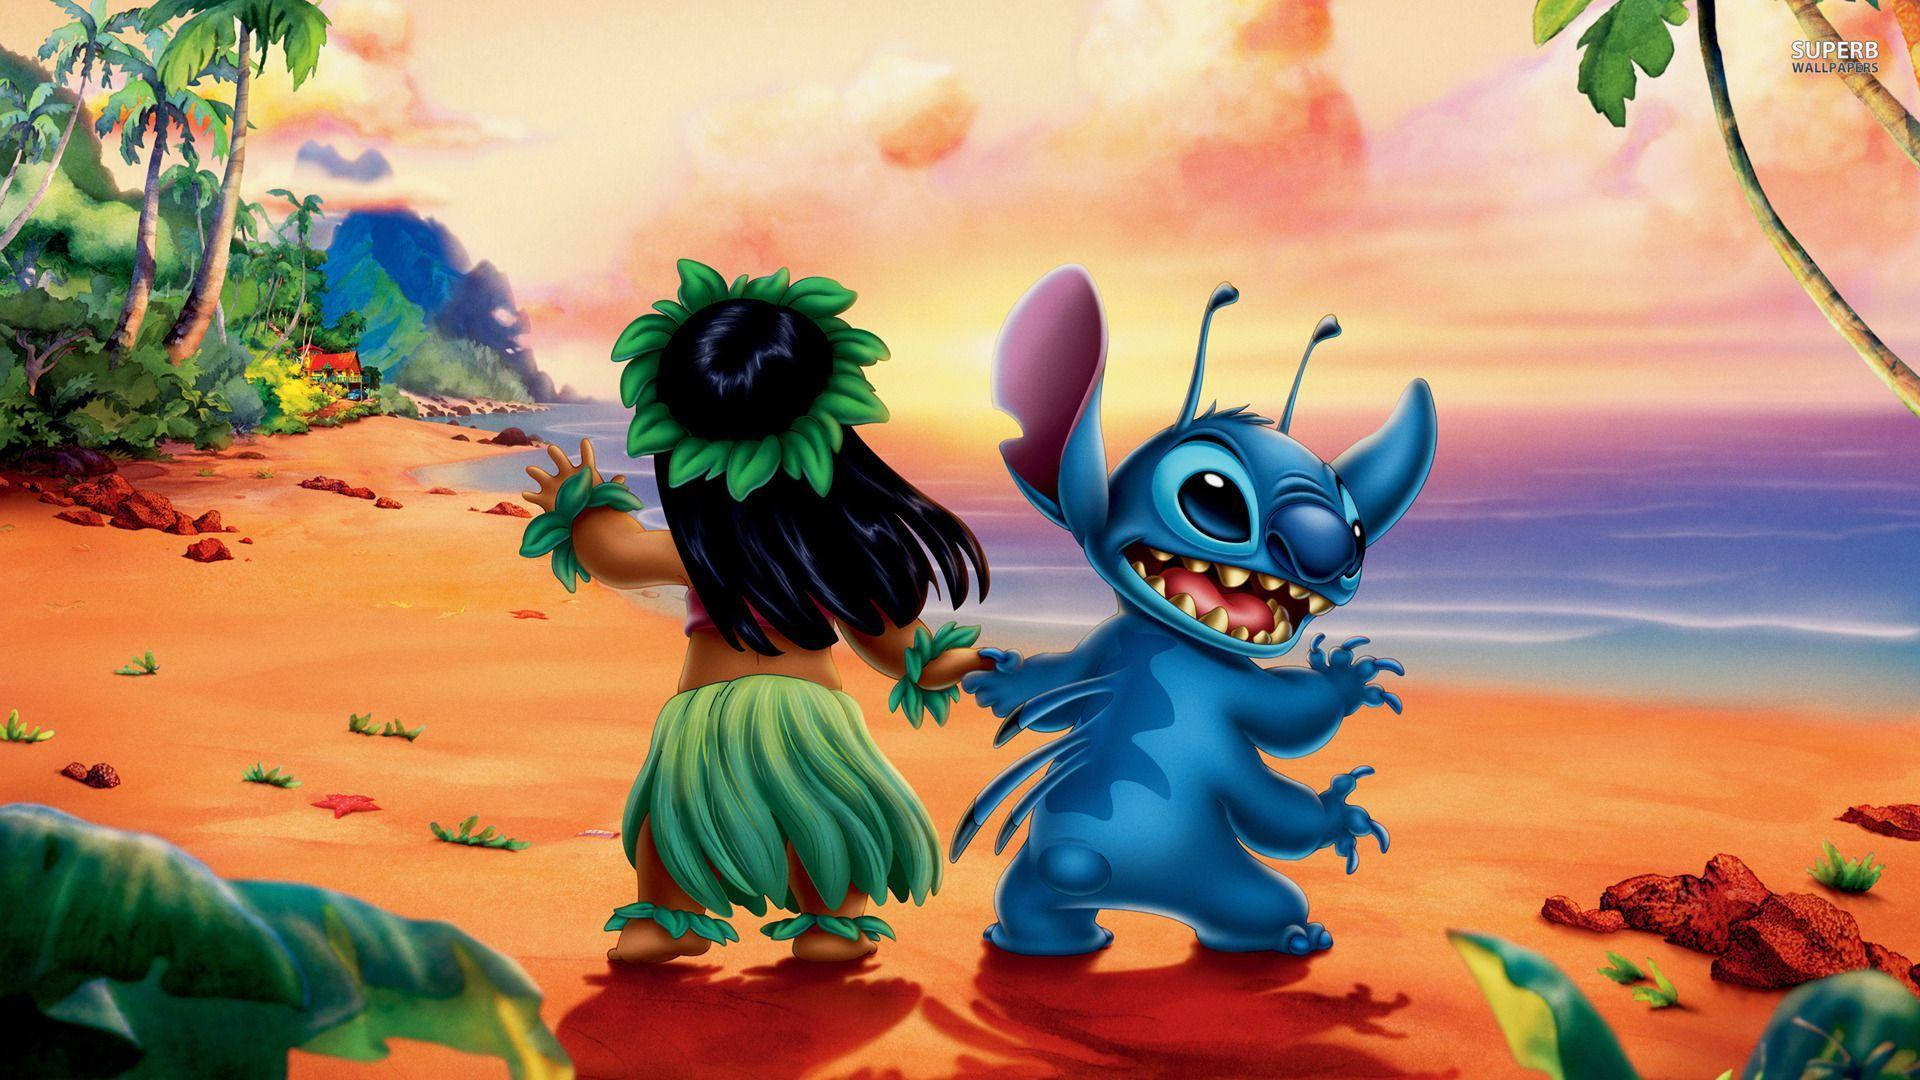 Best Friends In Action, Lilo And Stitch In Hawaiian Paradise. Wallpaper